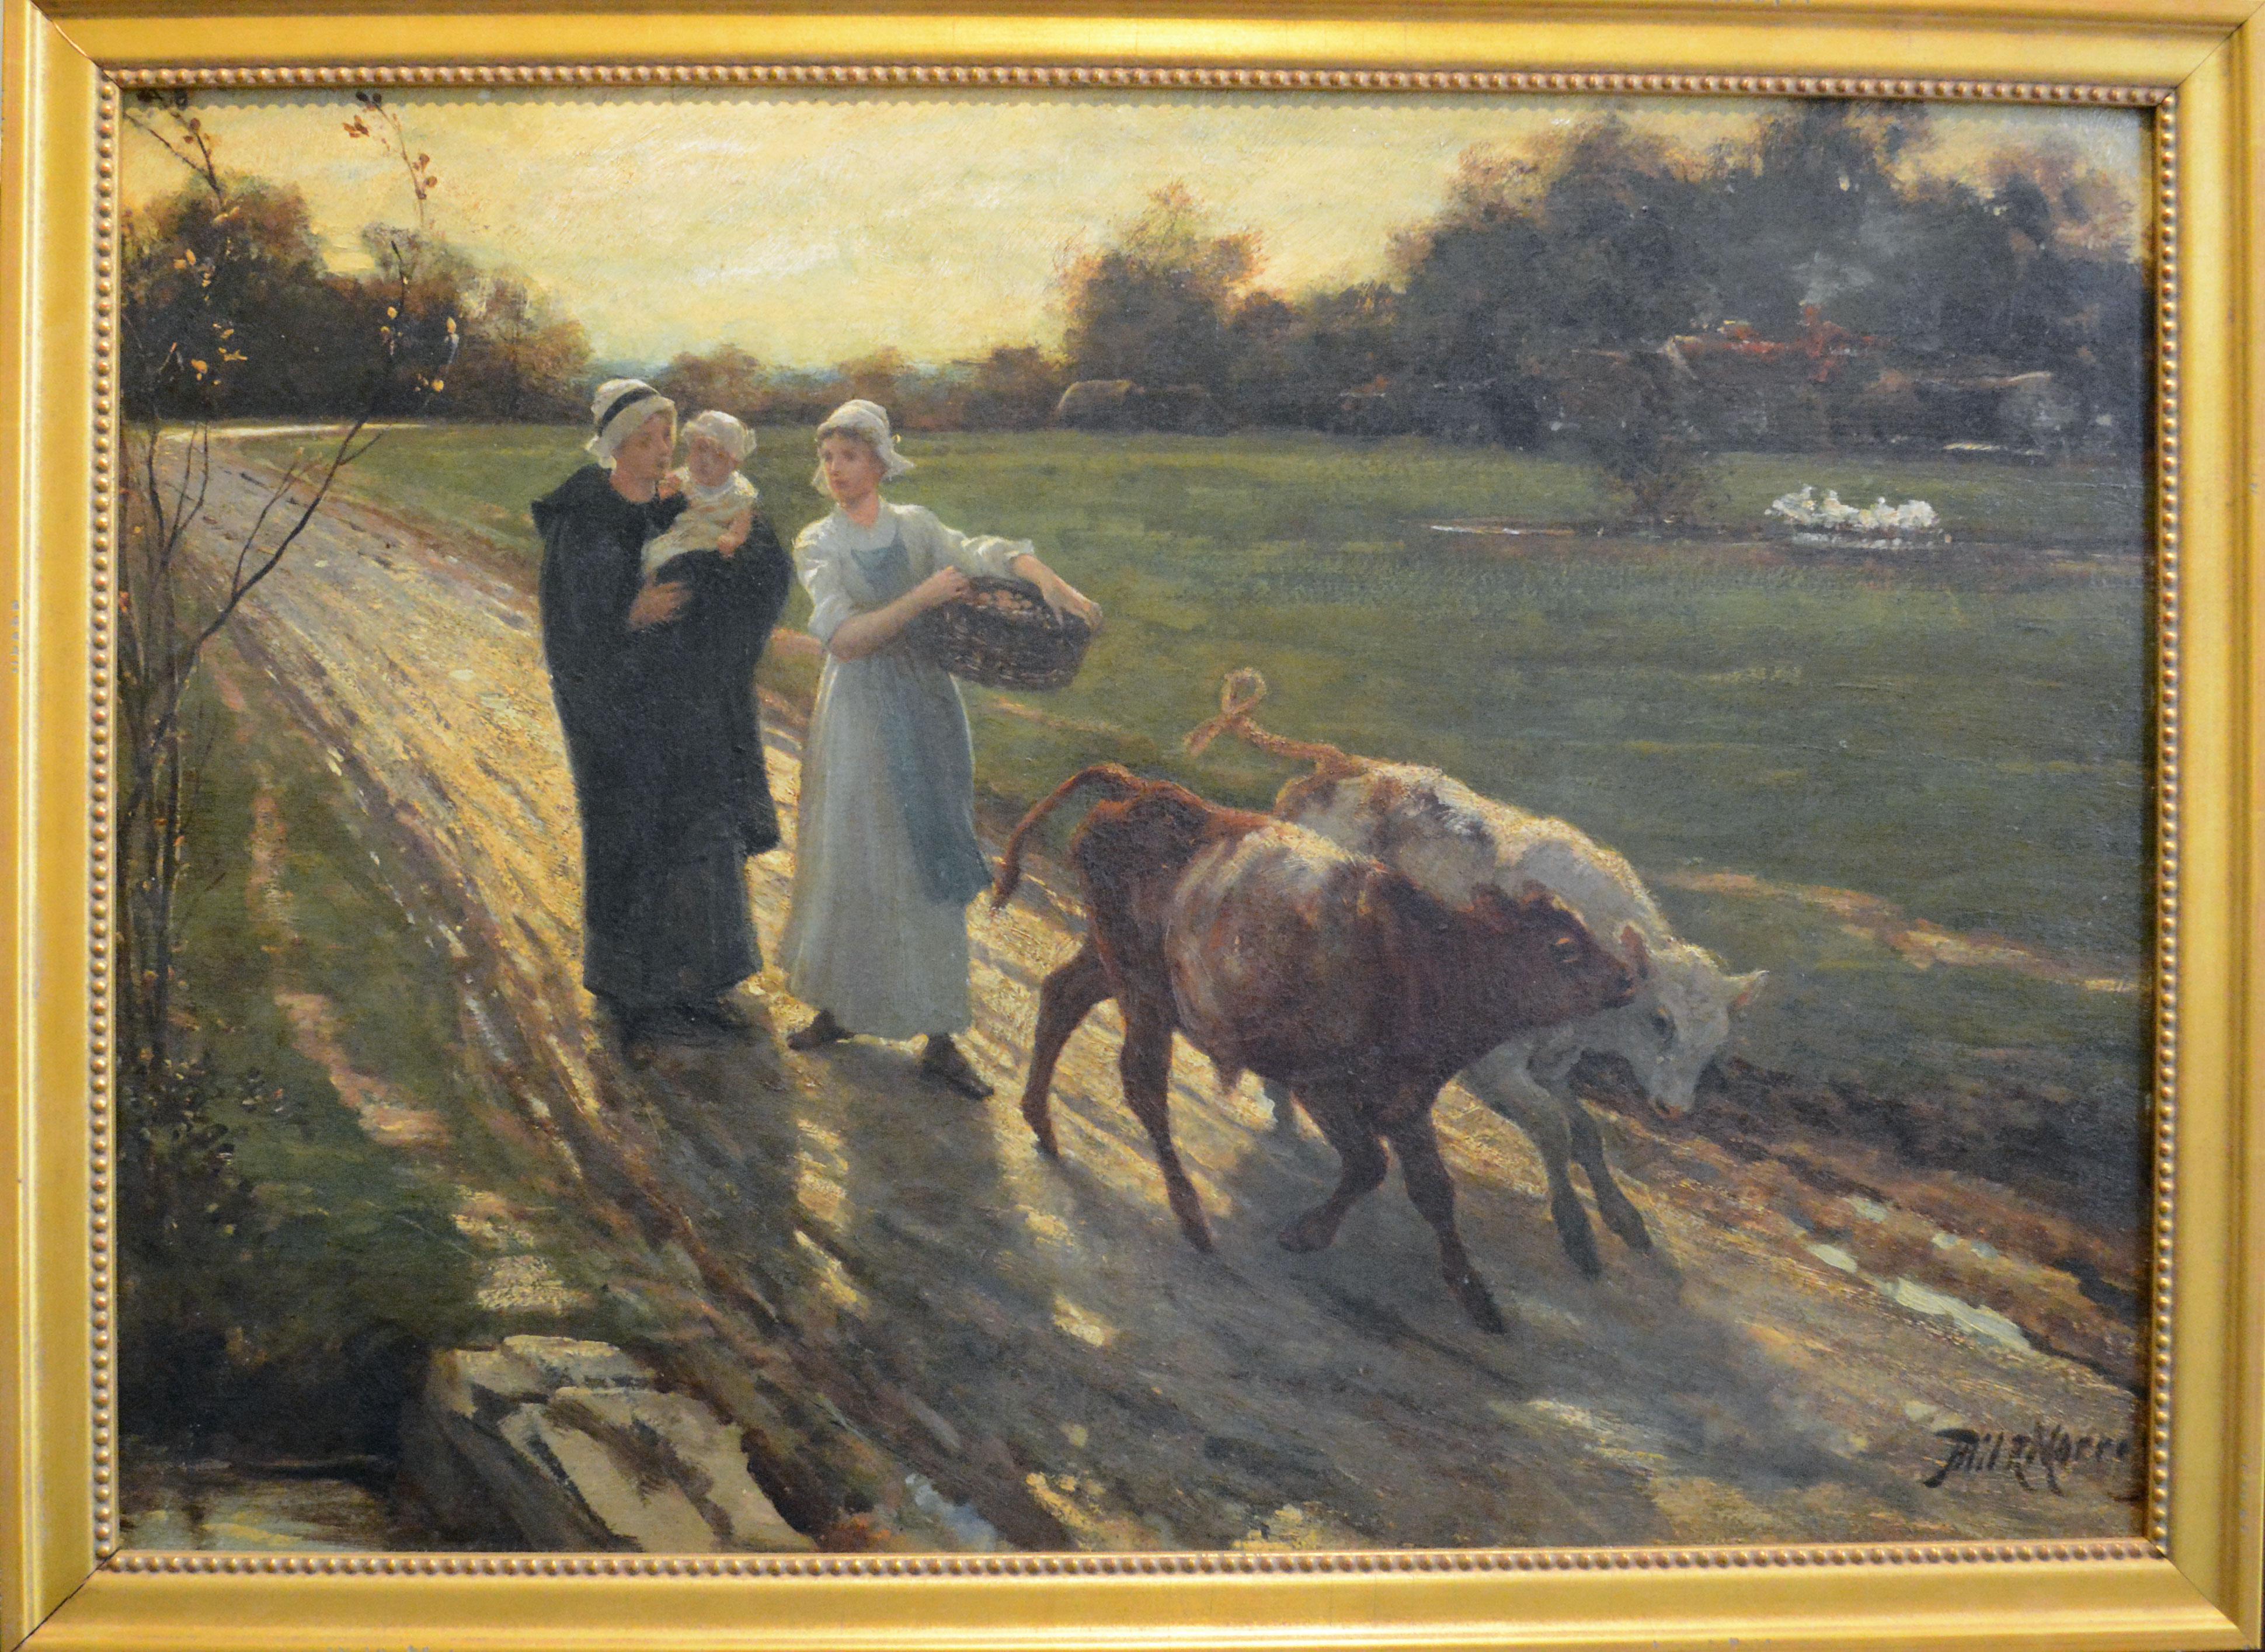 Maids on a Country Road - Painting by Philip Richard Morris